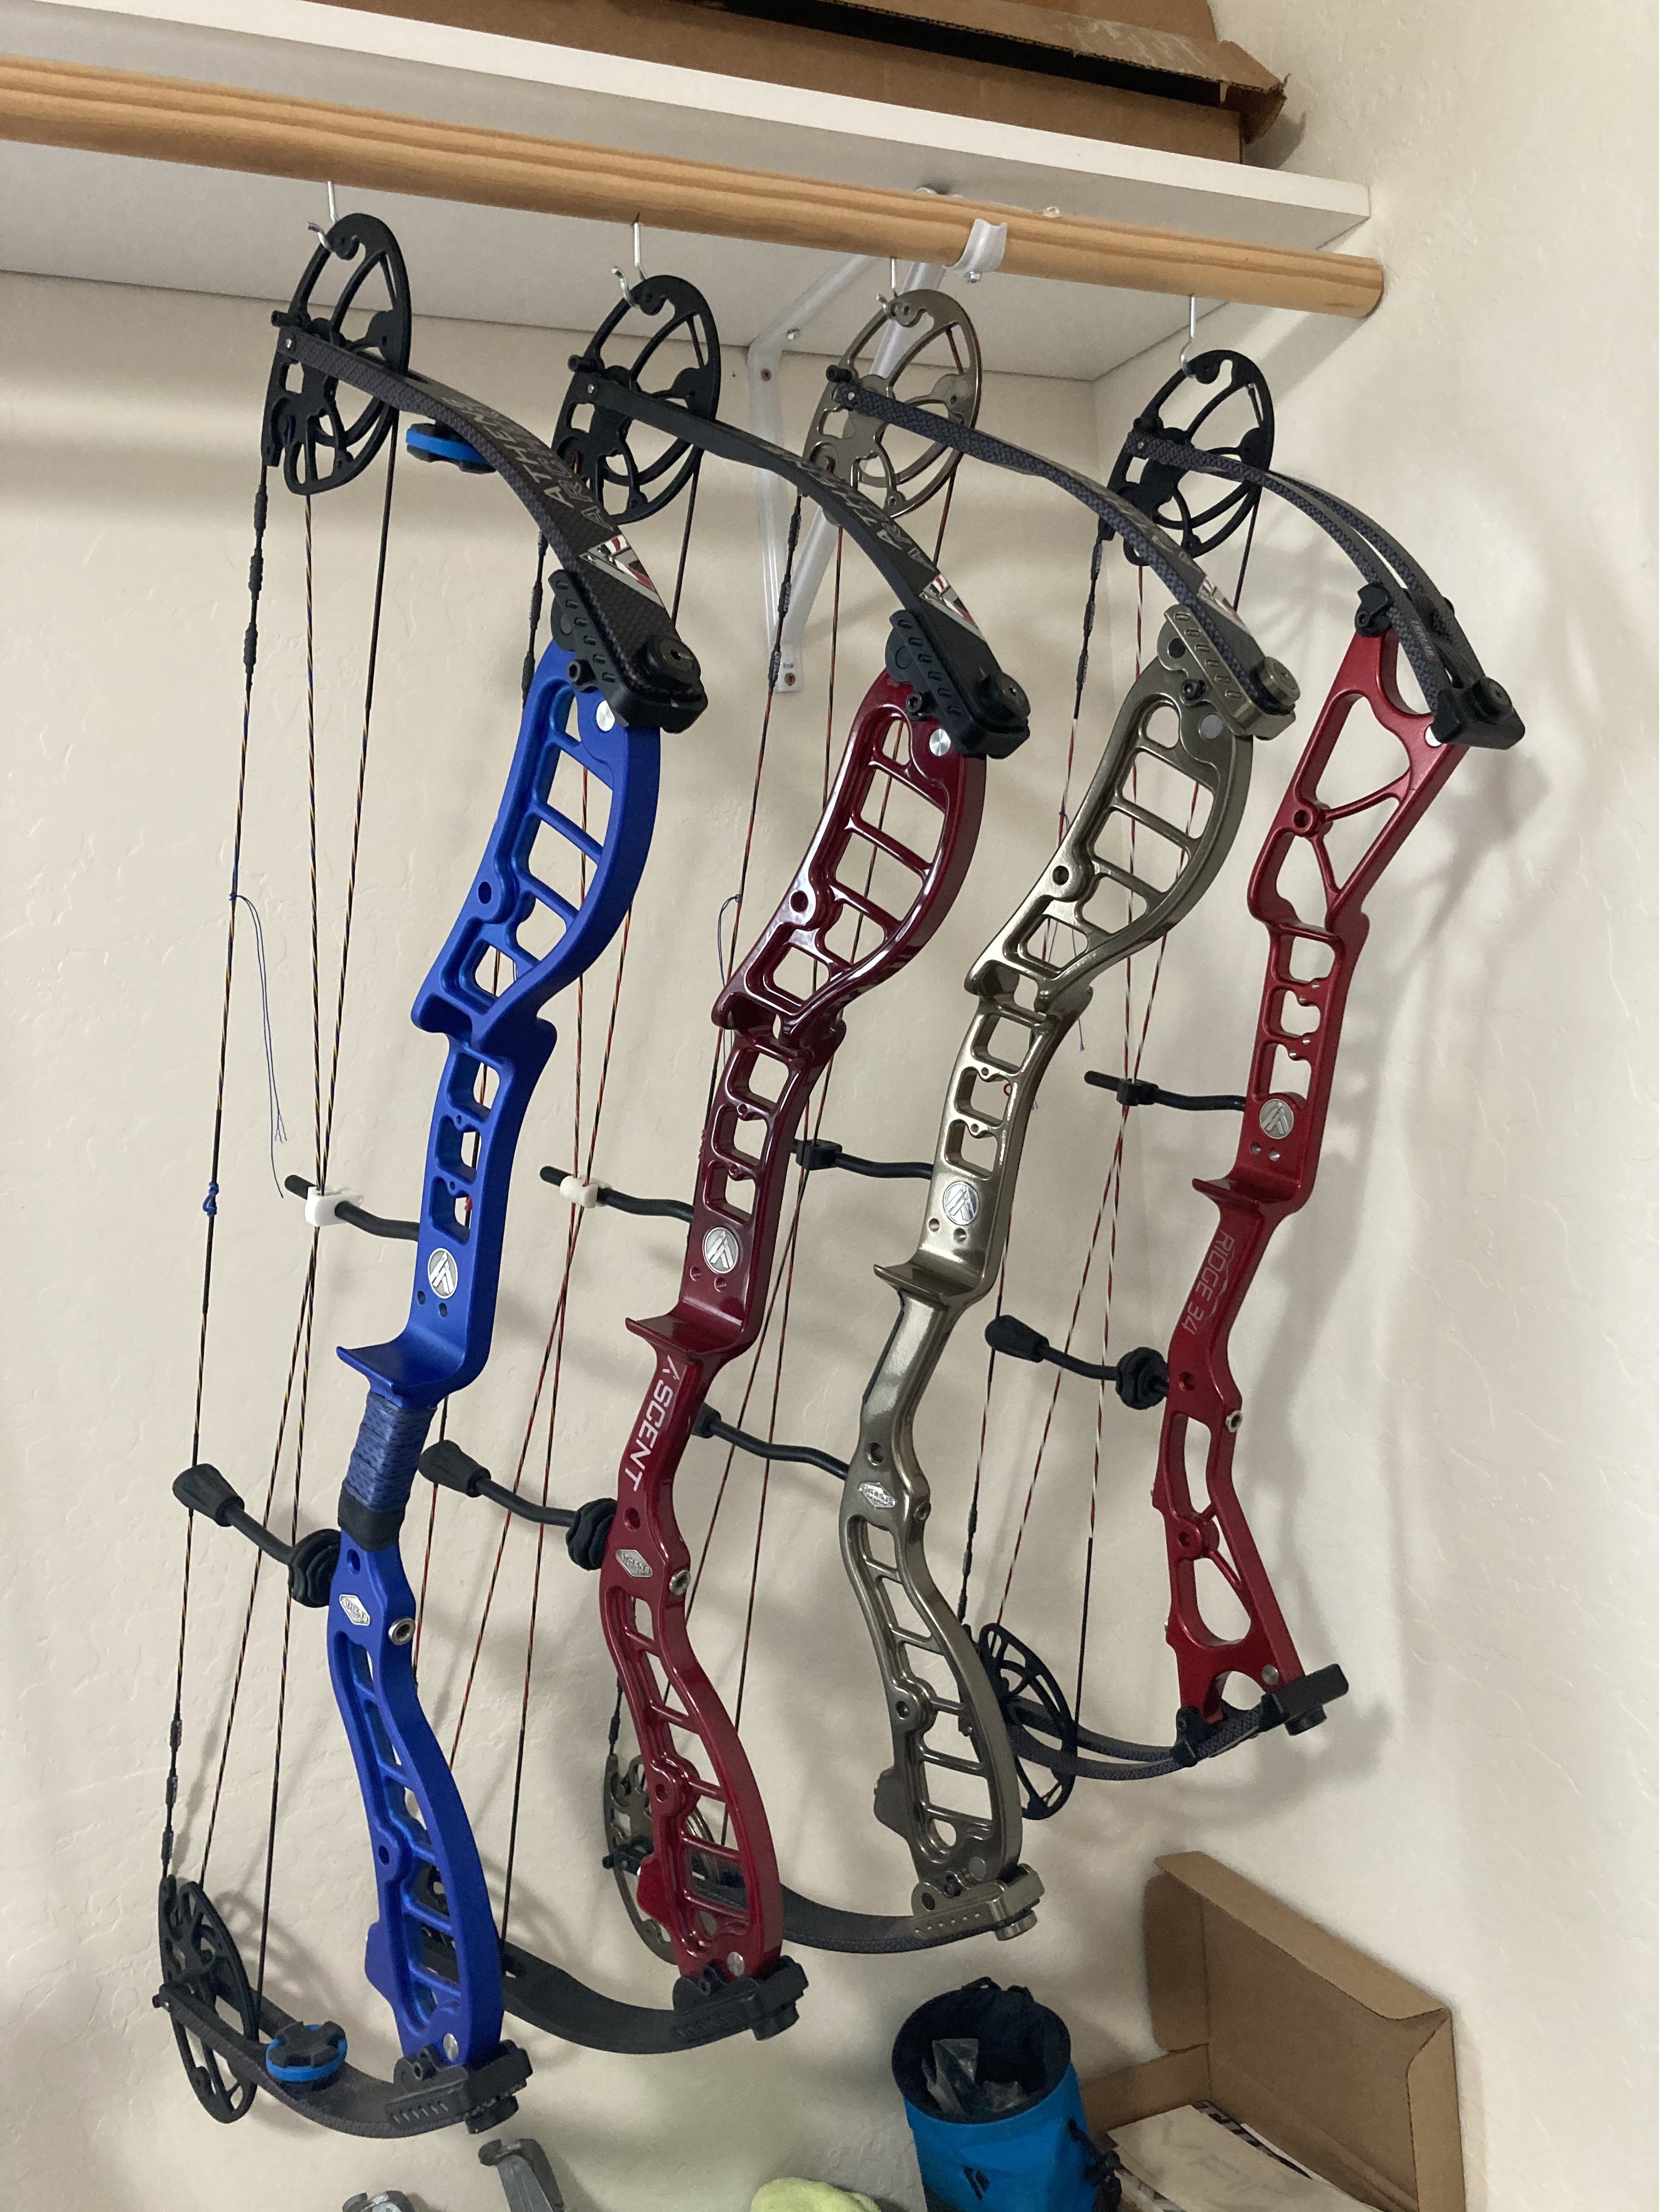 WTS 4 Athens compound bows Classified Ads